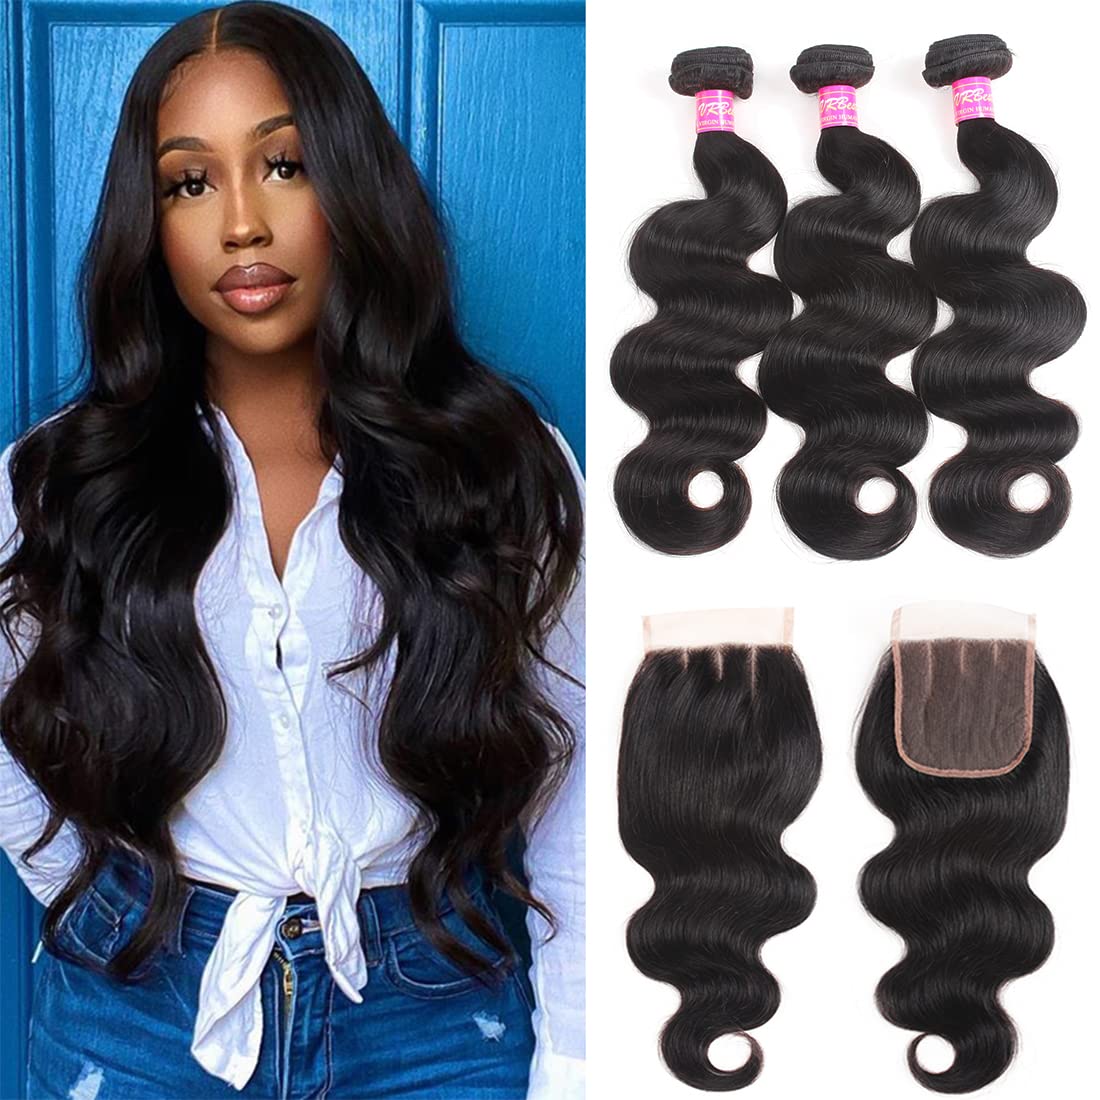 Body Wave Bundles with Closure (10 12 14+10) Brazilian Human Hair 3 Bundles  with 4x4 Lace Closure Virgin Hair 12A Unprocessed Human Hair Extensions  Weave Weft With Closure Natural Color 10/12/14+10 Inch Body Bundles with C…